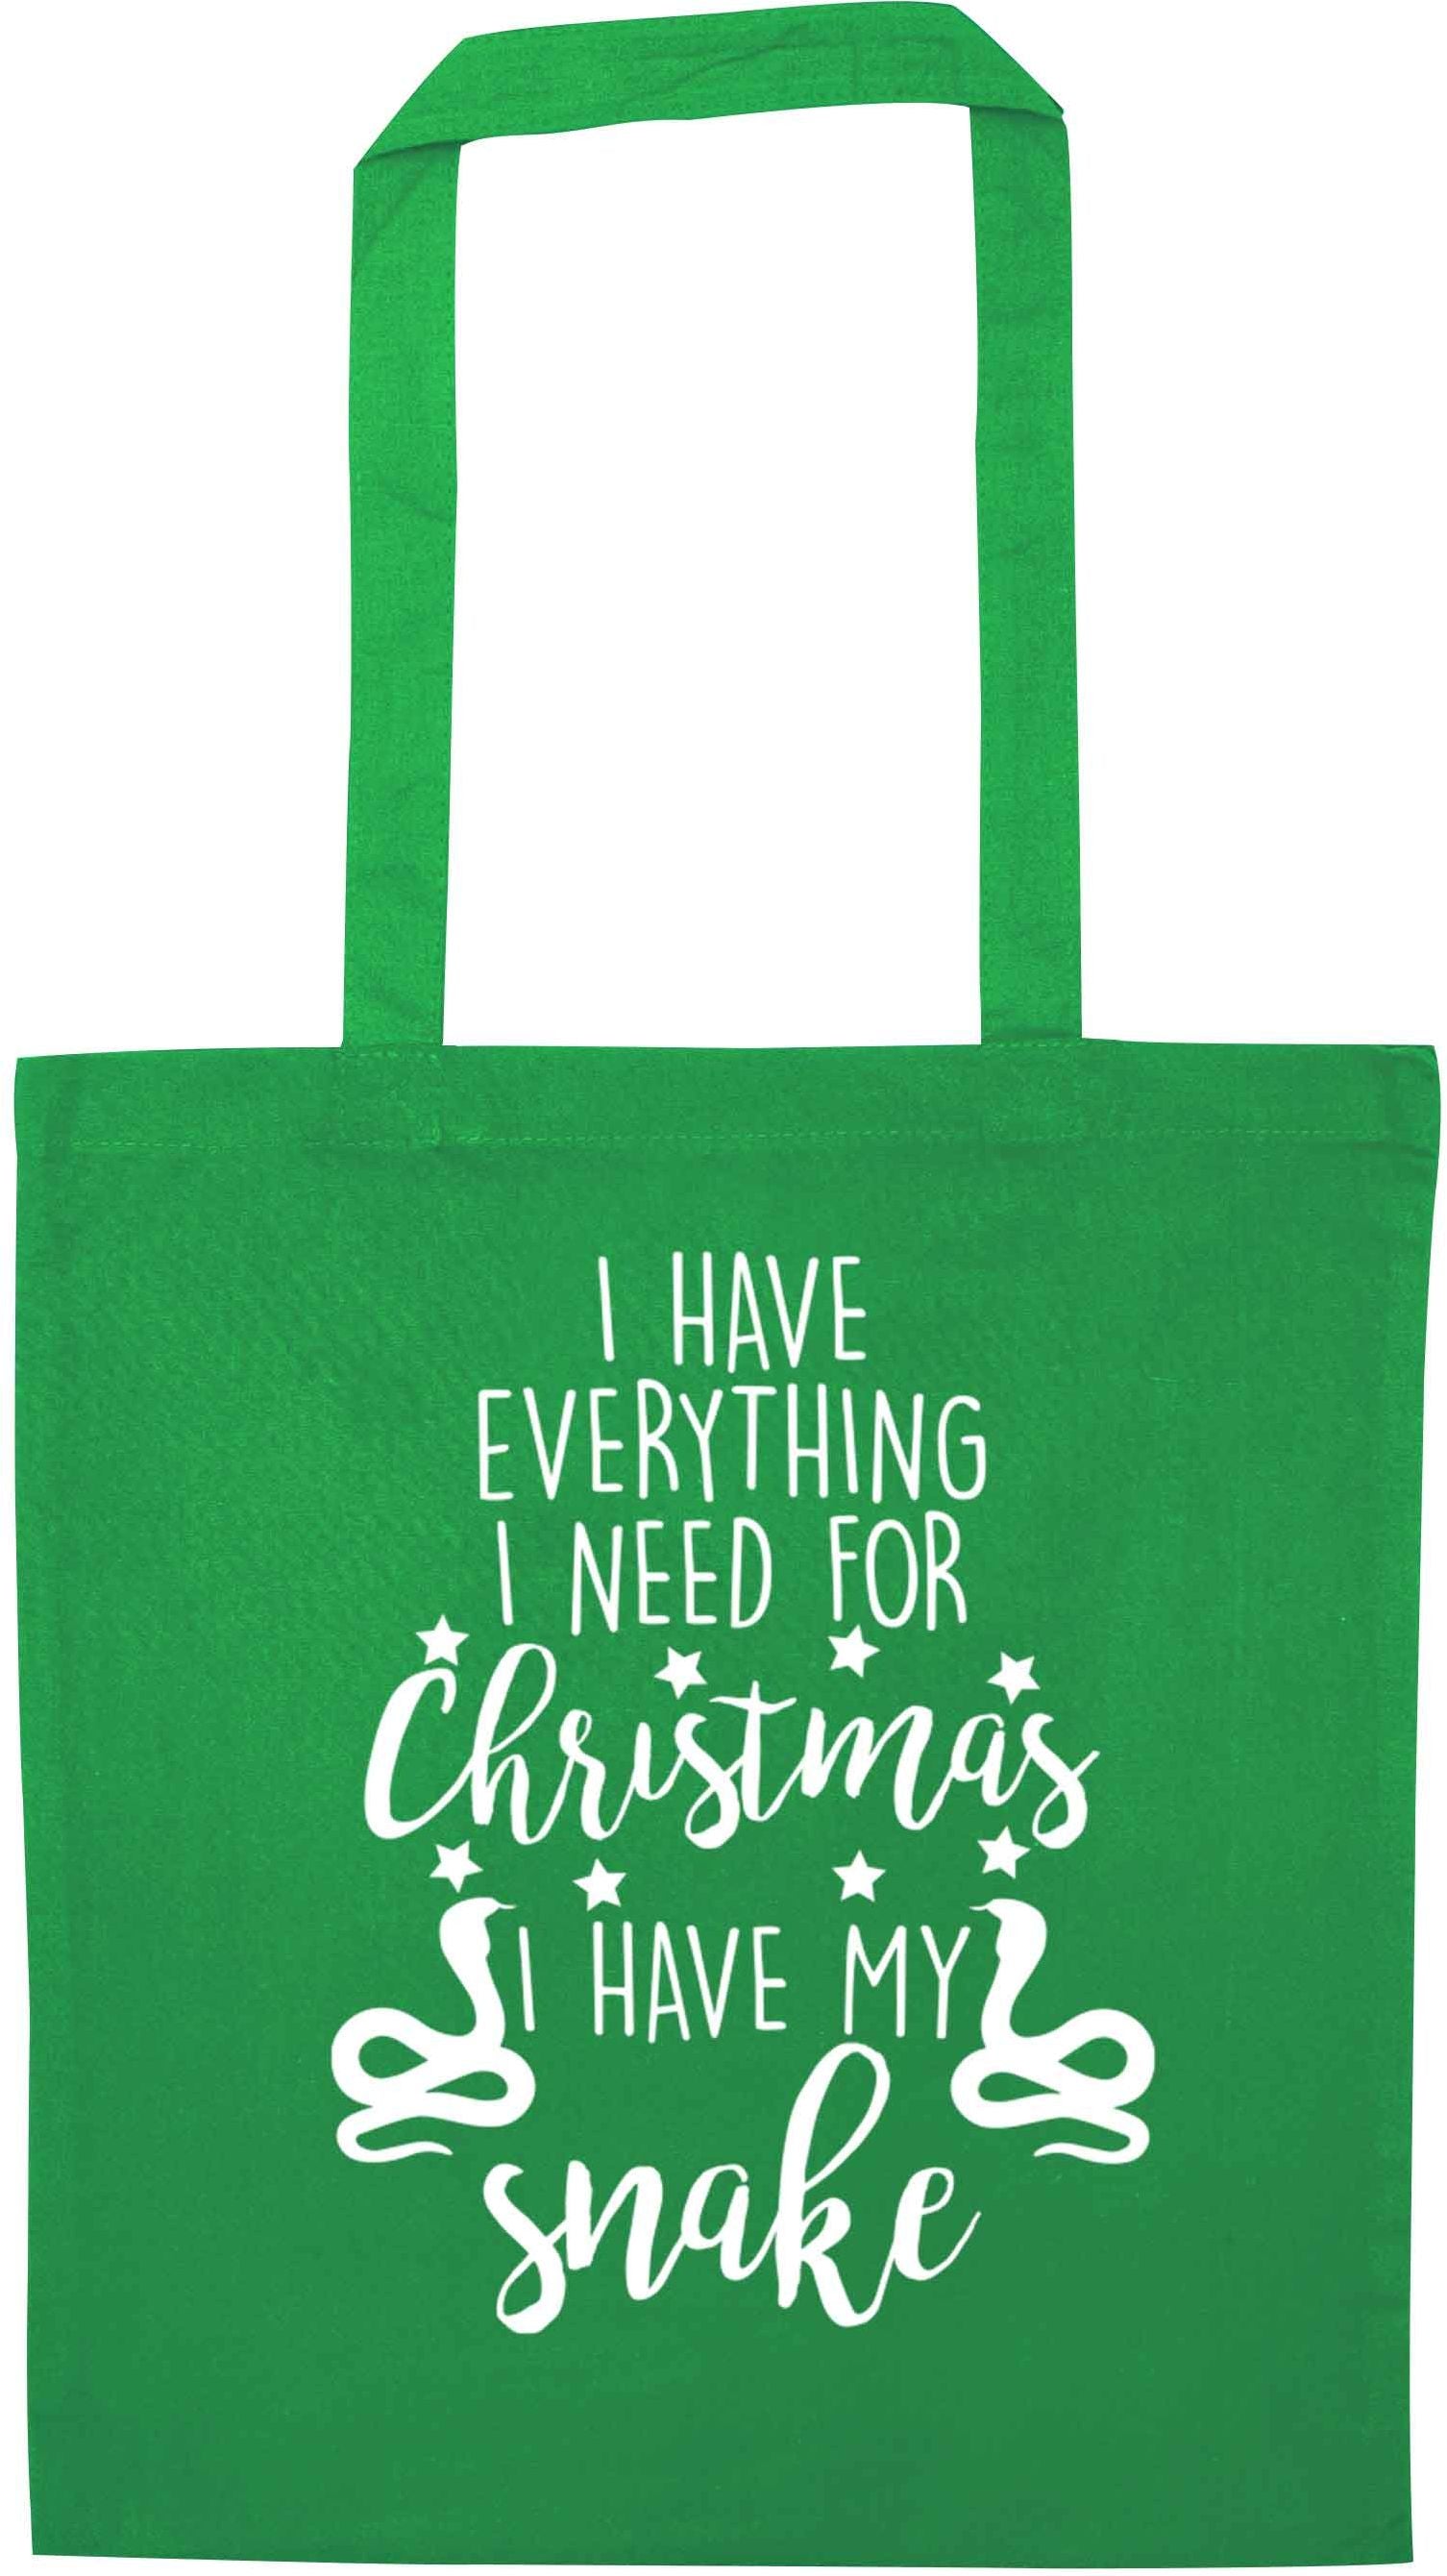 I have everything I need for Christmas I have my snake green tote bag